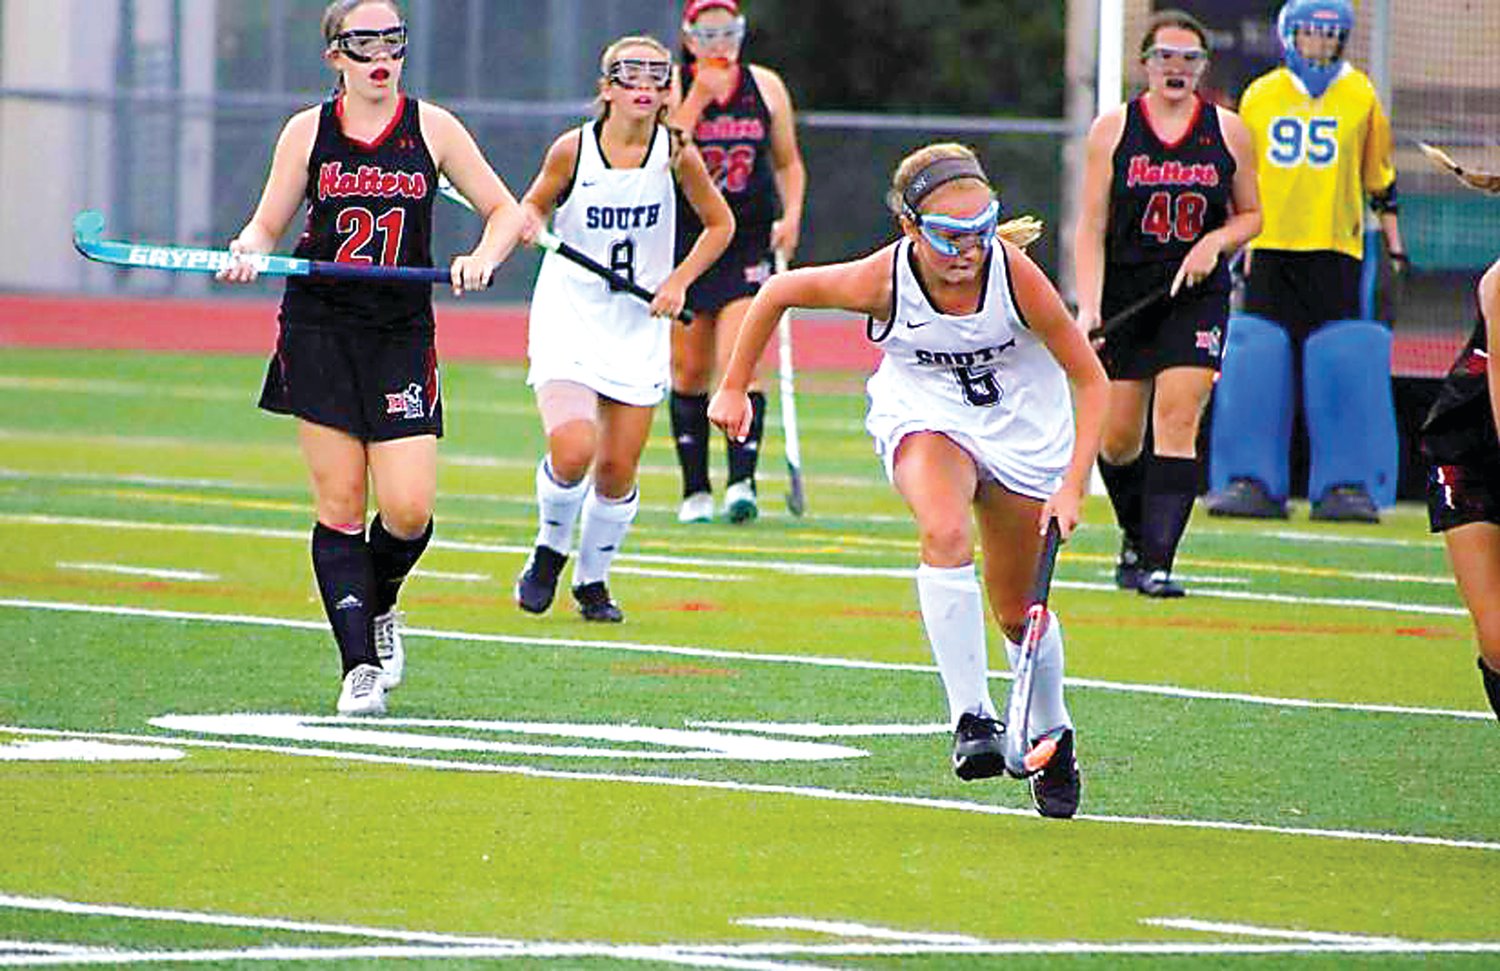 Sophomore Anna Shirley, No. 6, leads Central Bucks South in points this season. Photograph courtesy of Anna Shirley